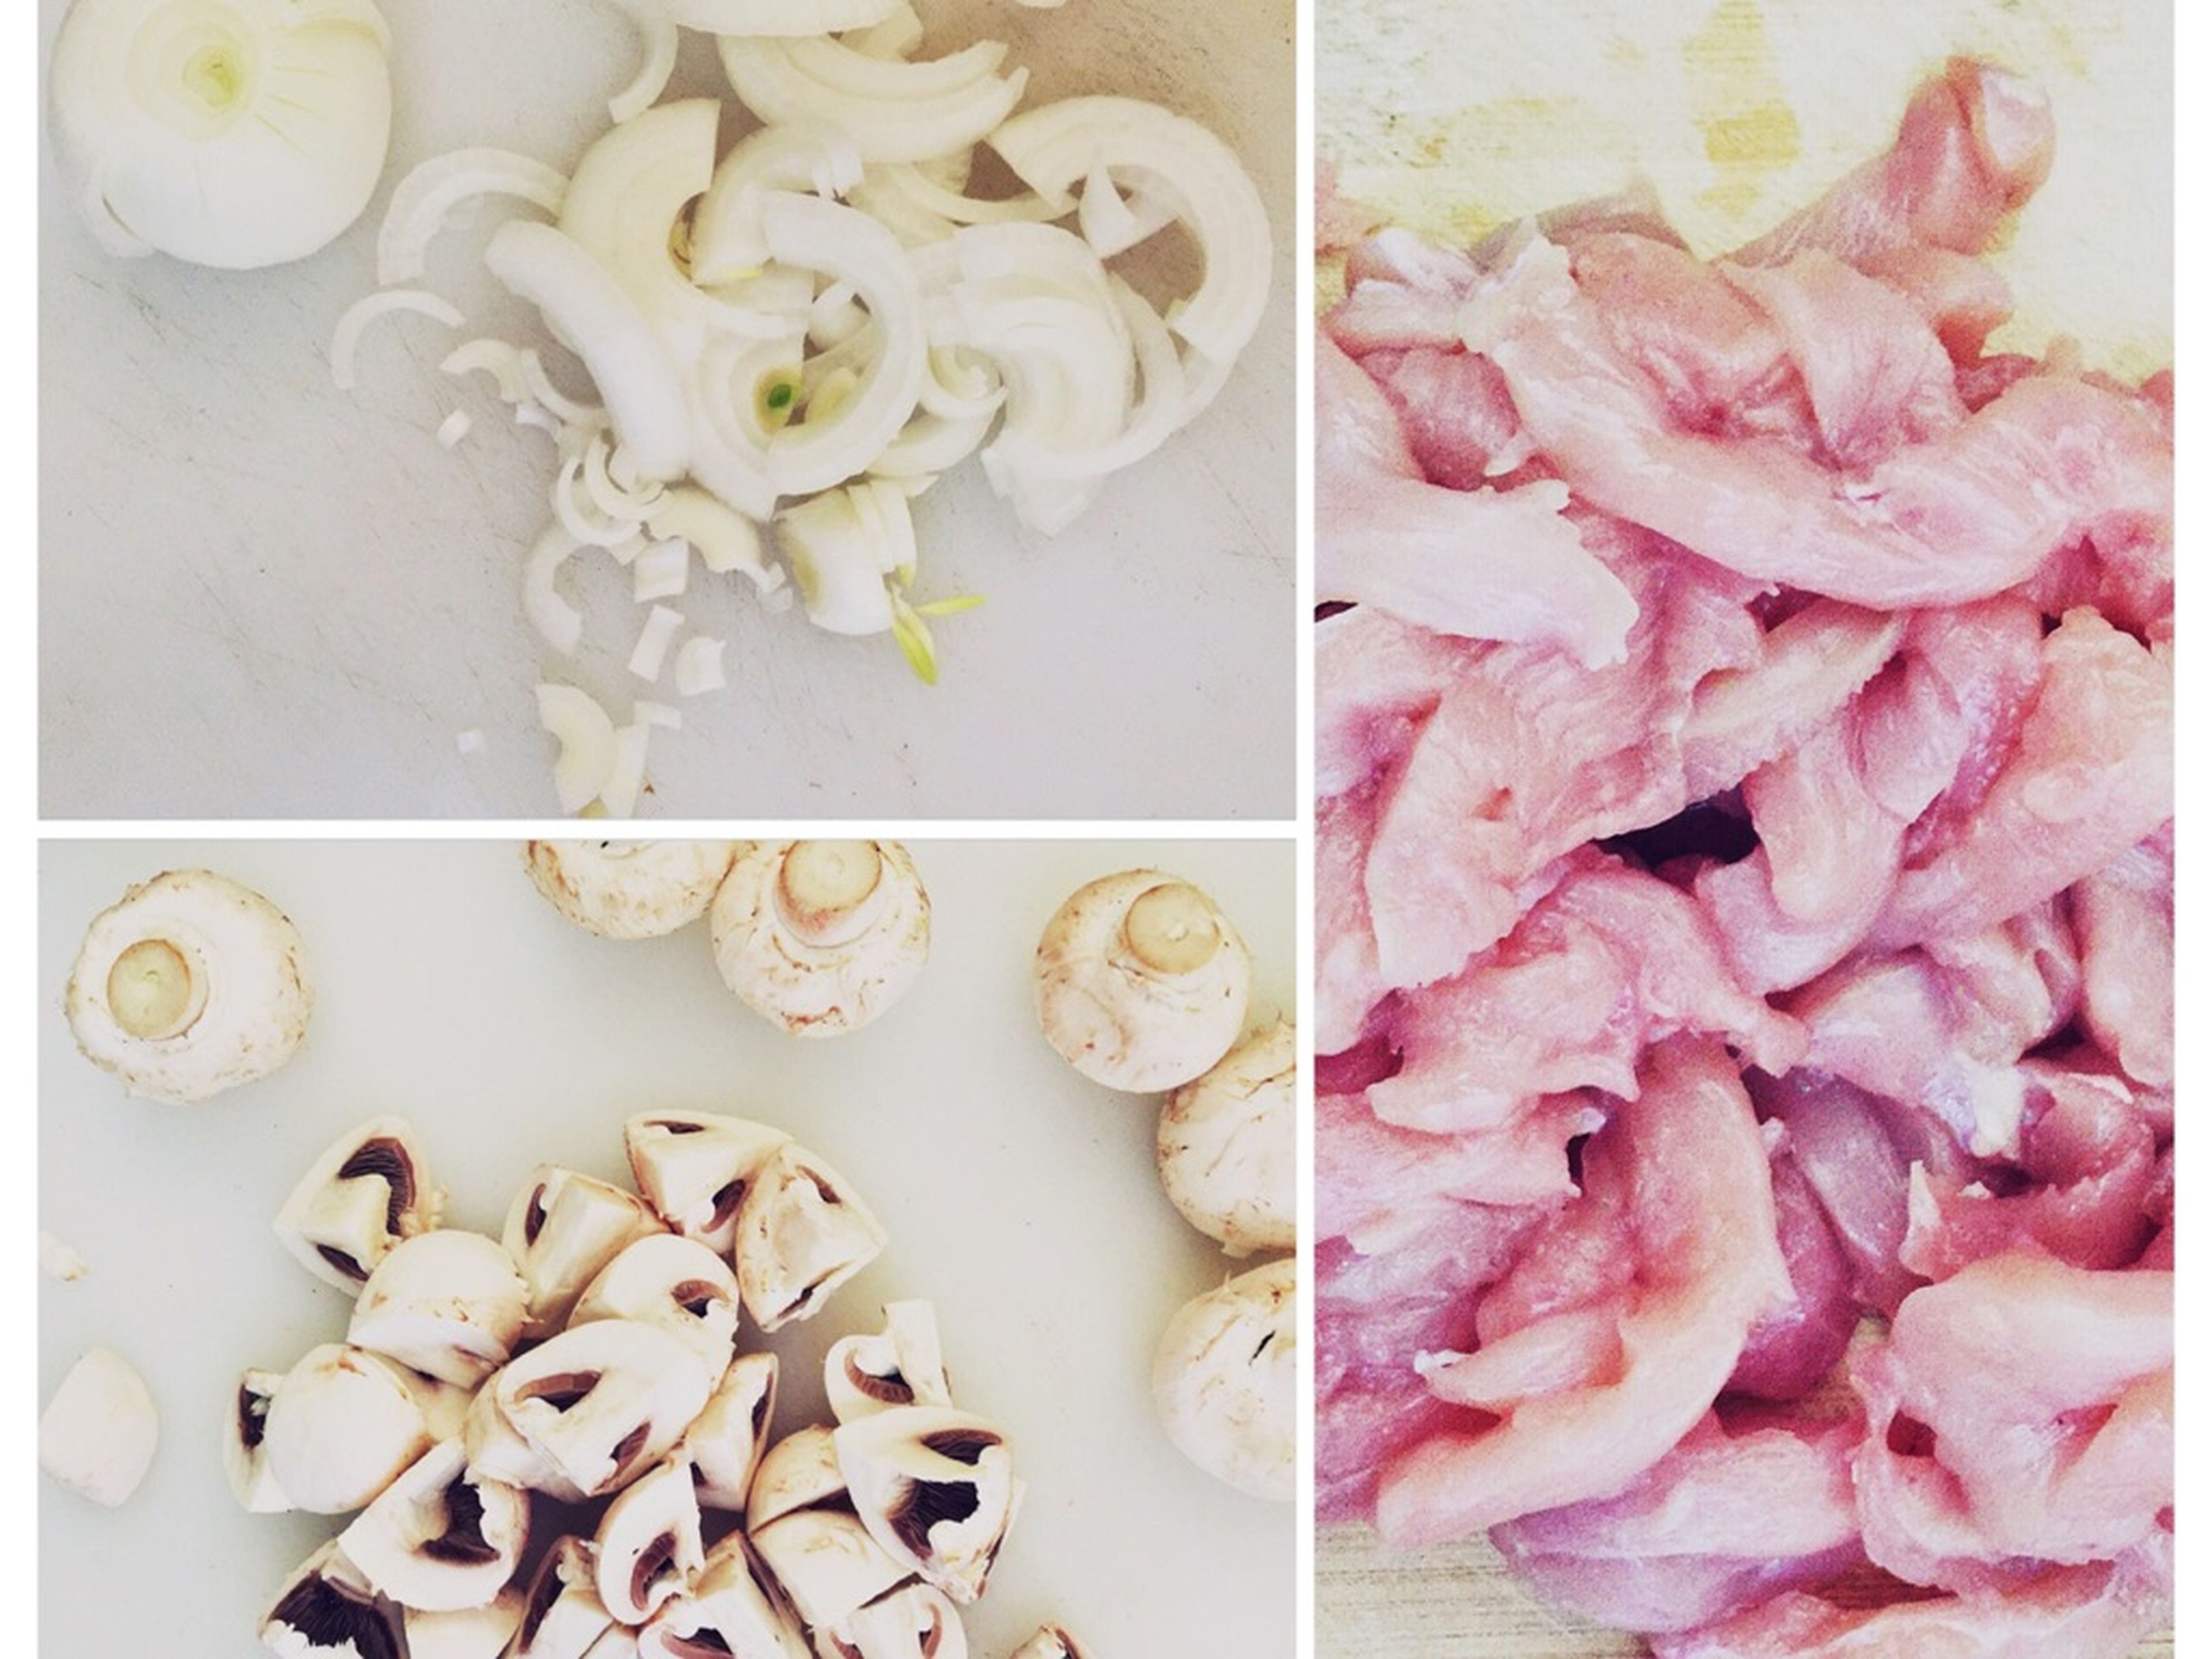 Cut the chicken breasts into stripes. Peel and thinly slice onions and quarter button mushrooms.